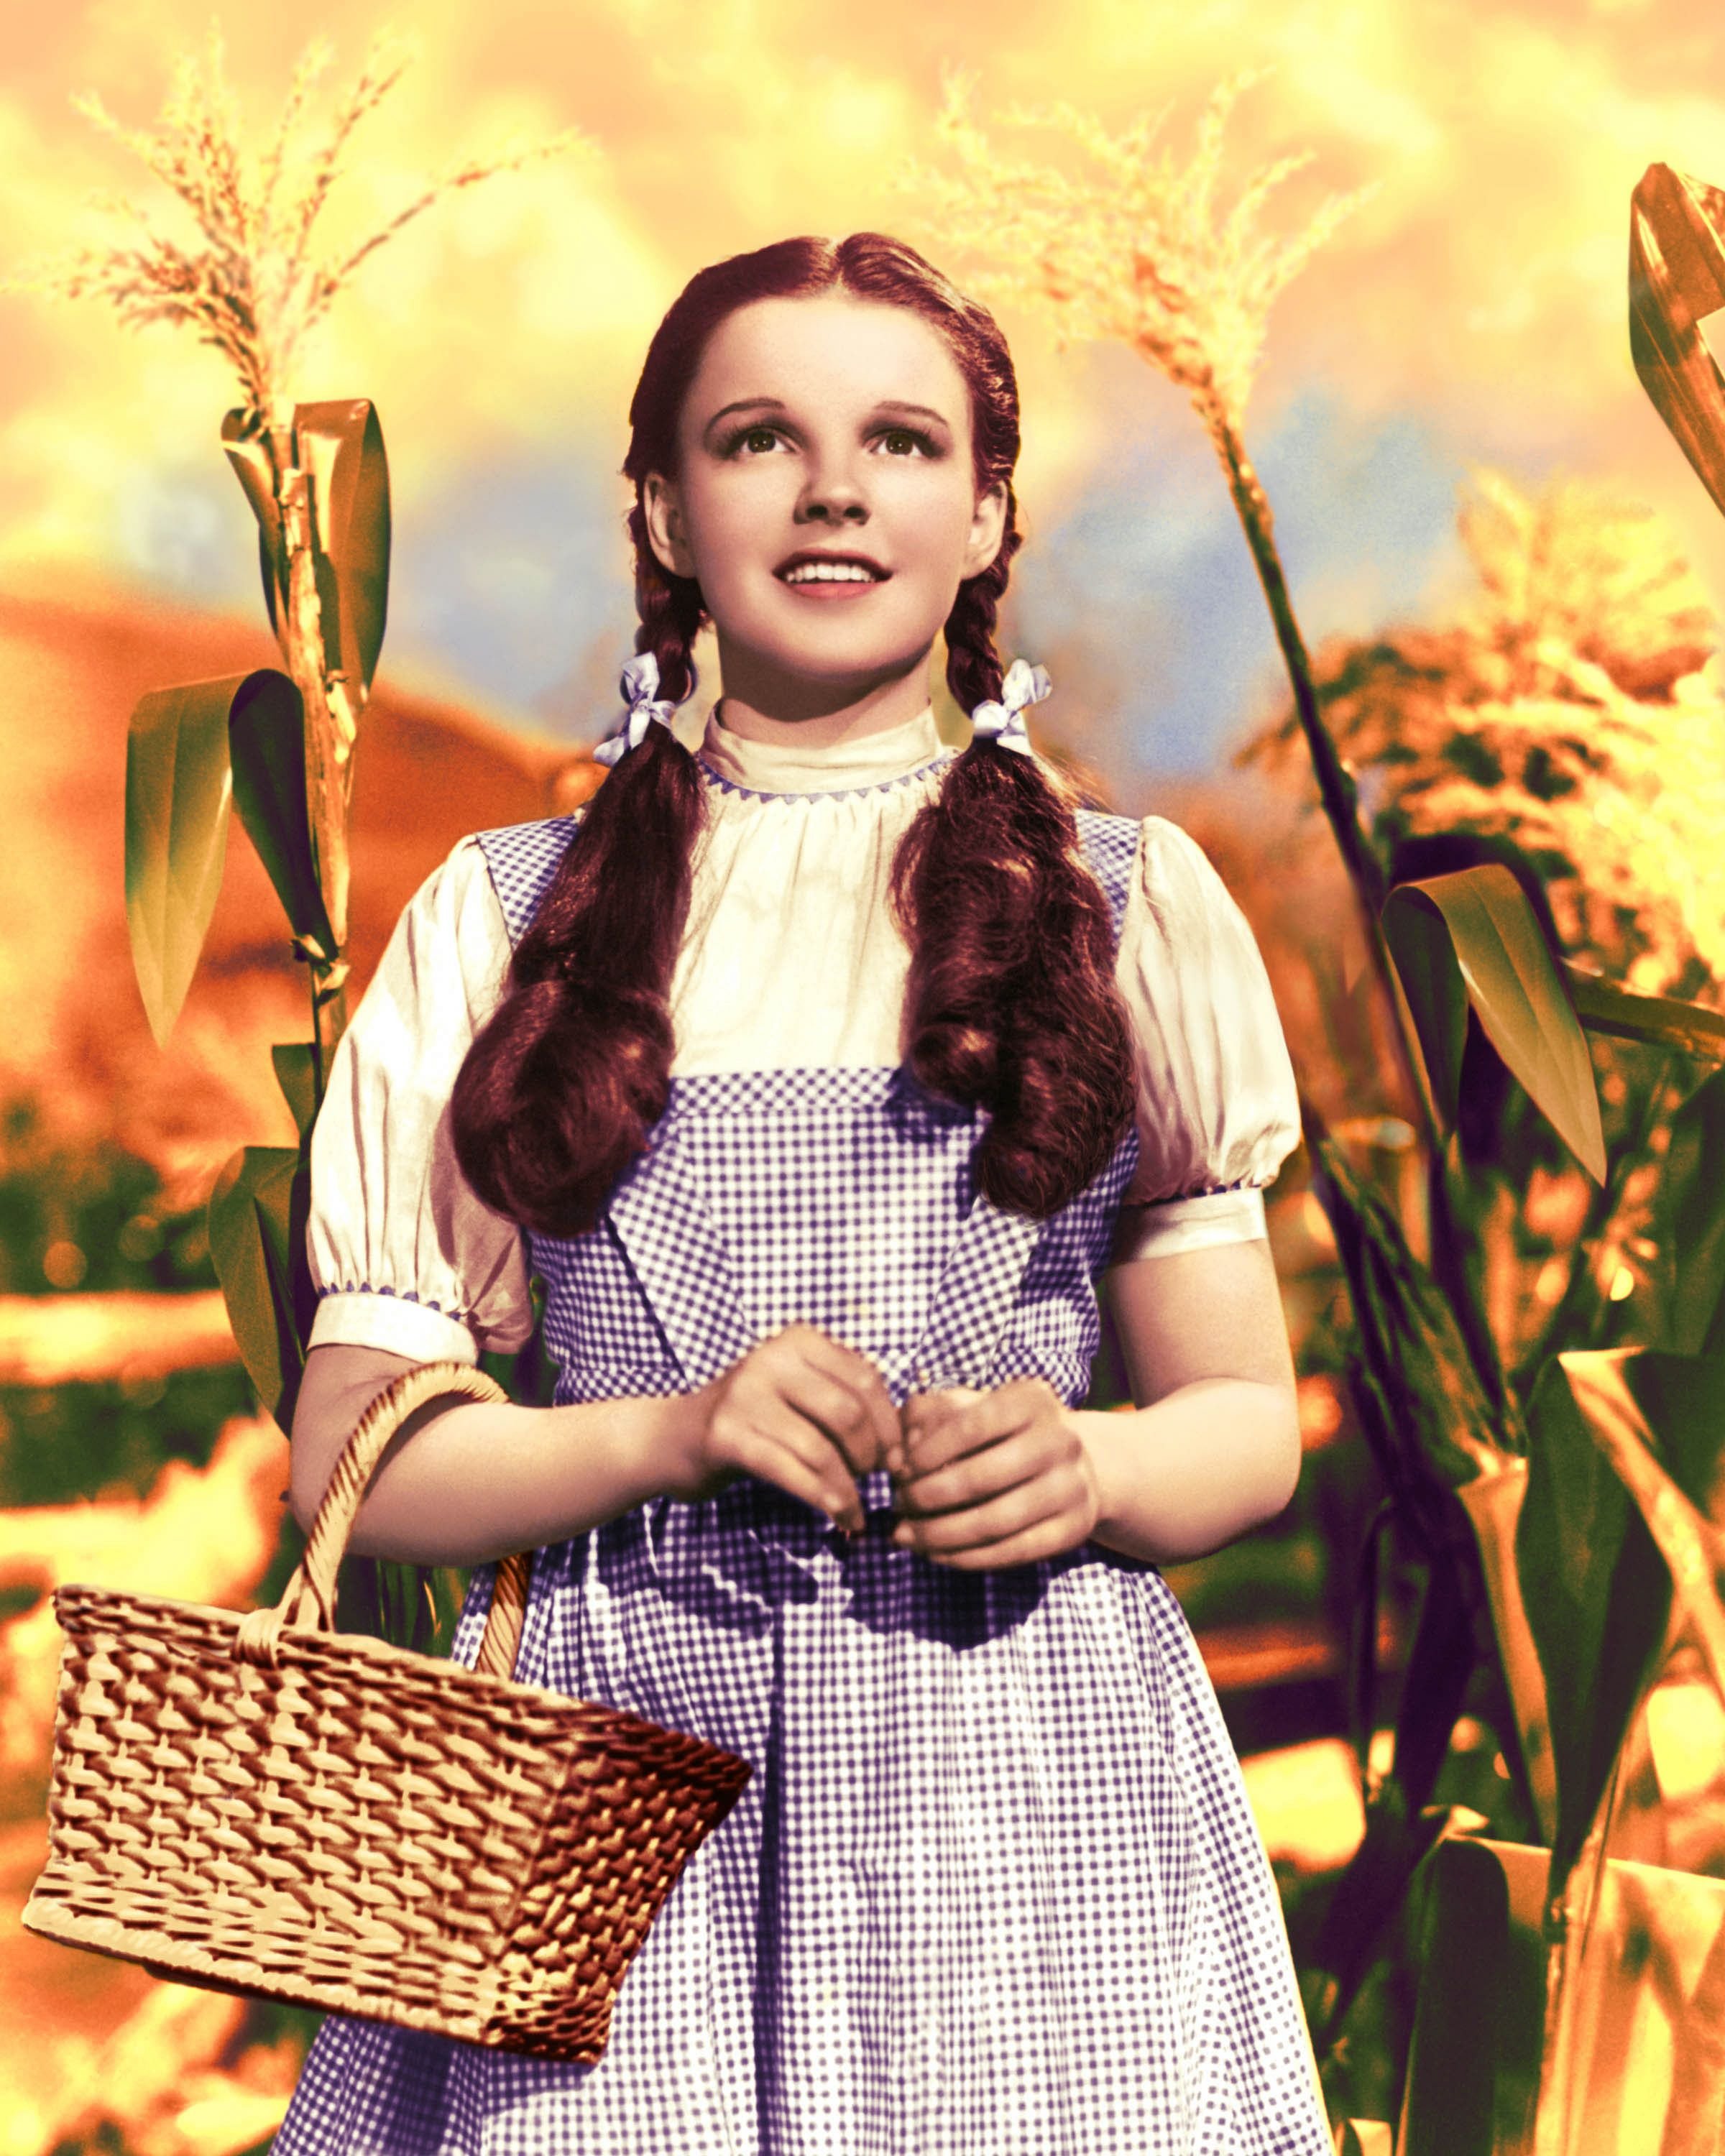 Judy Garland as Dorothy Gale in "The Wizard of Oz" circa 1939. | Photo: Getty Images